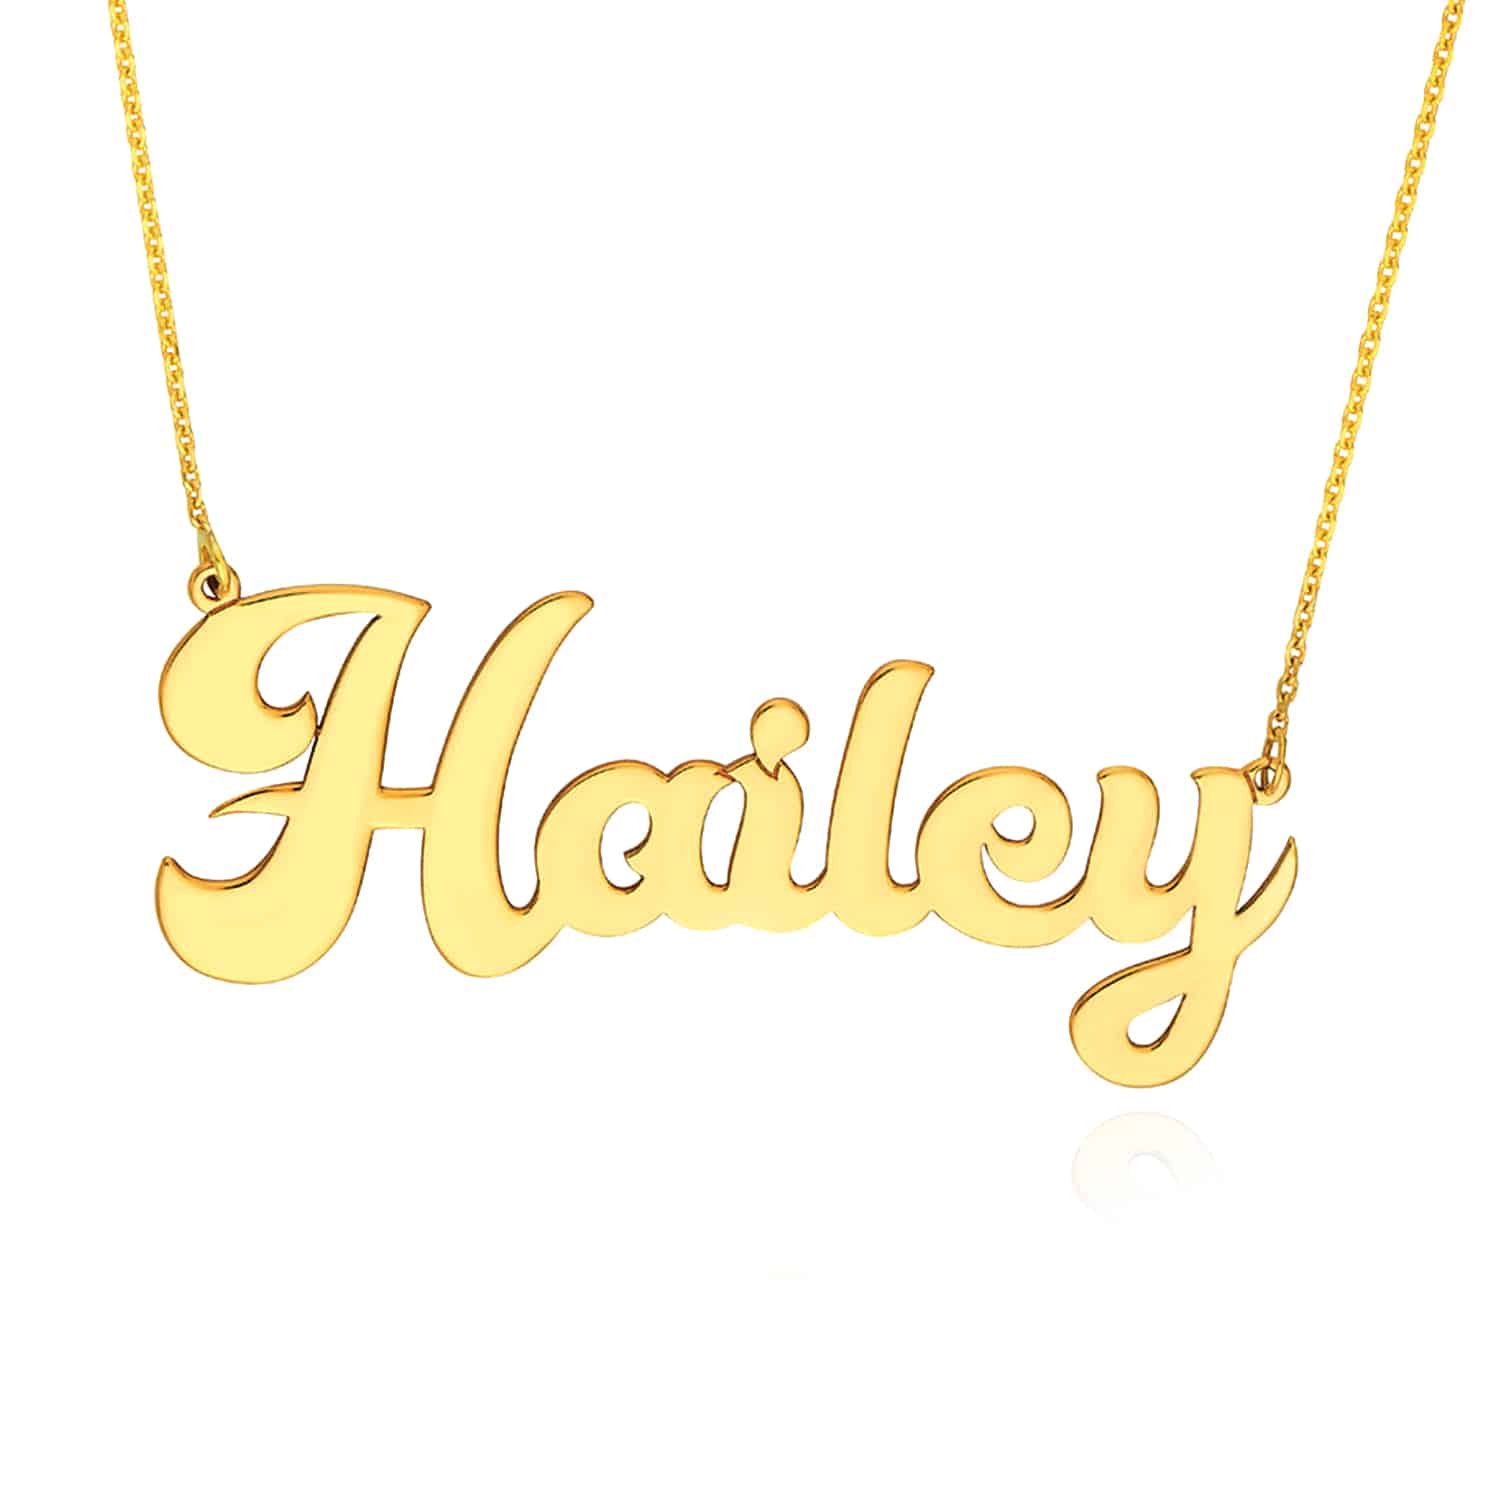 Customizable 14K Gold Yellow White Rose Cursive Style Nameplate Pendant Necklace - Yellow Gold, 16"-18" Adjustable